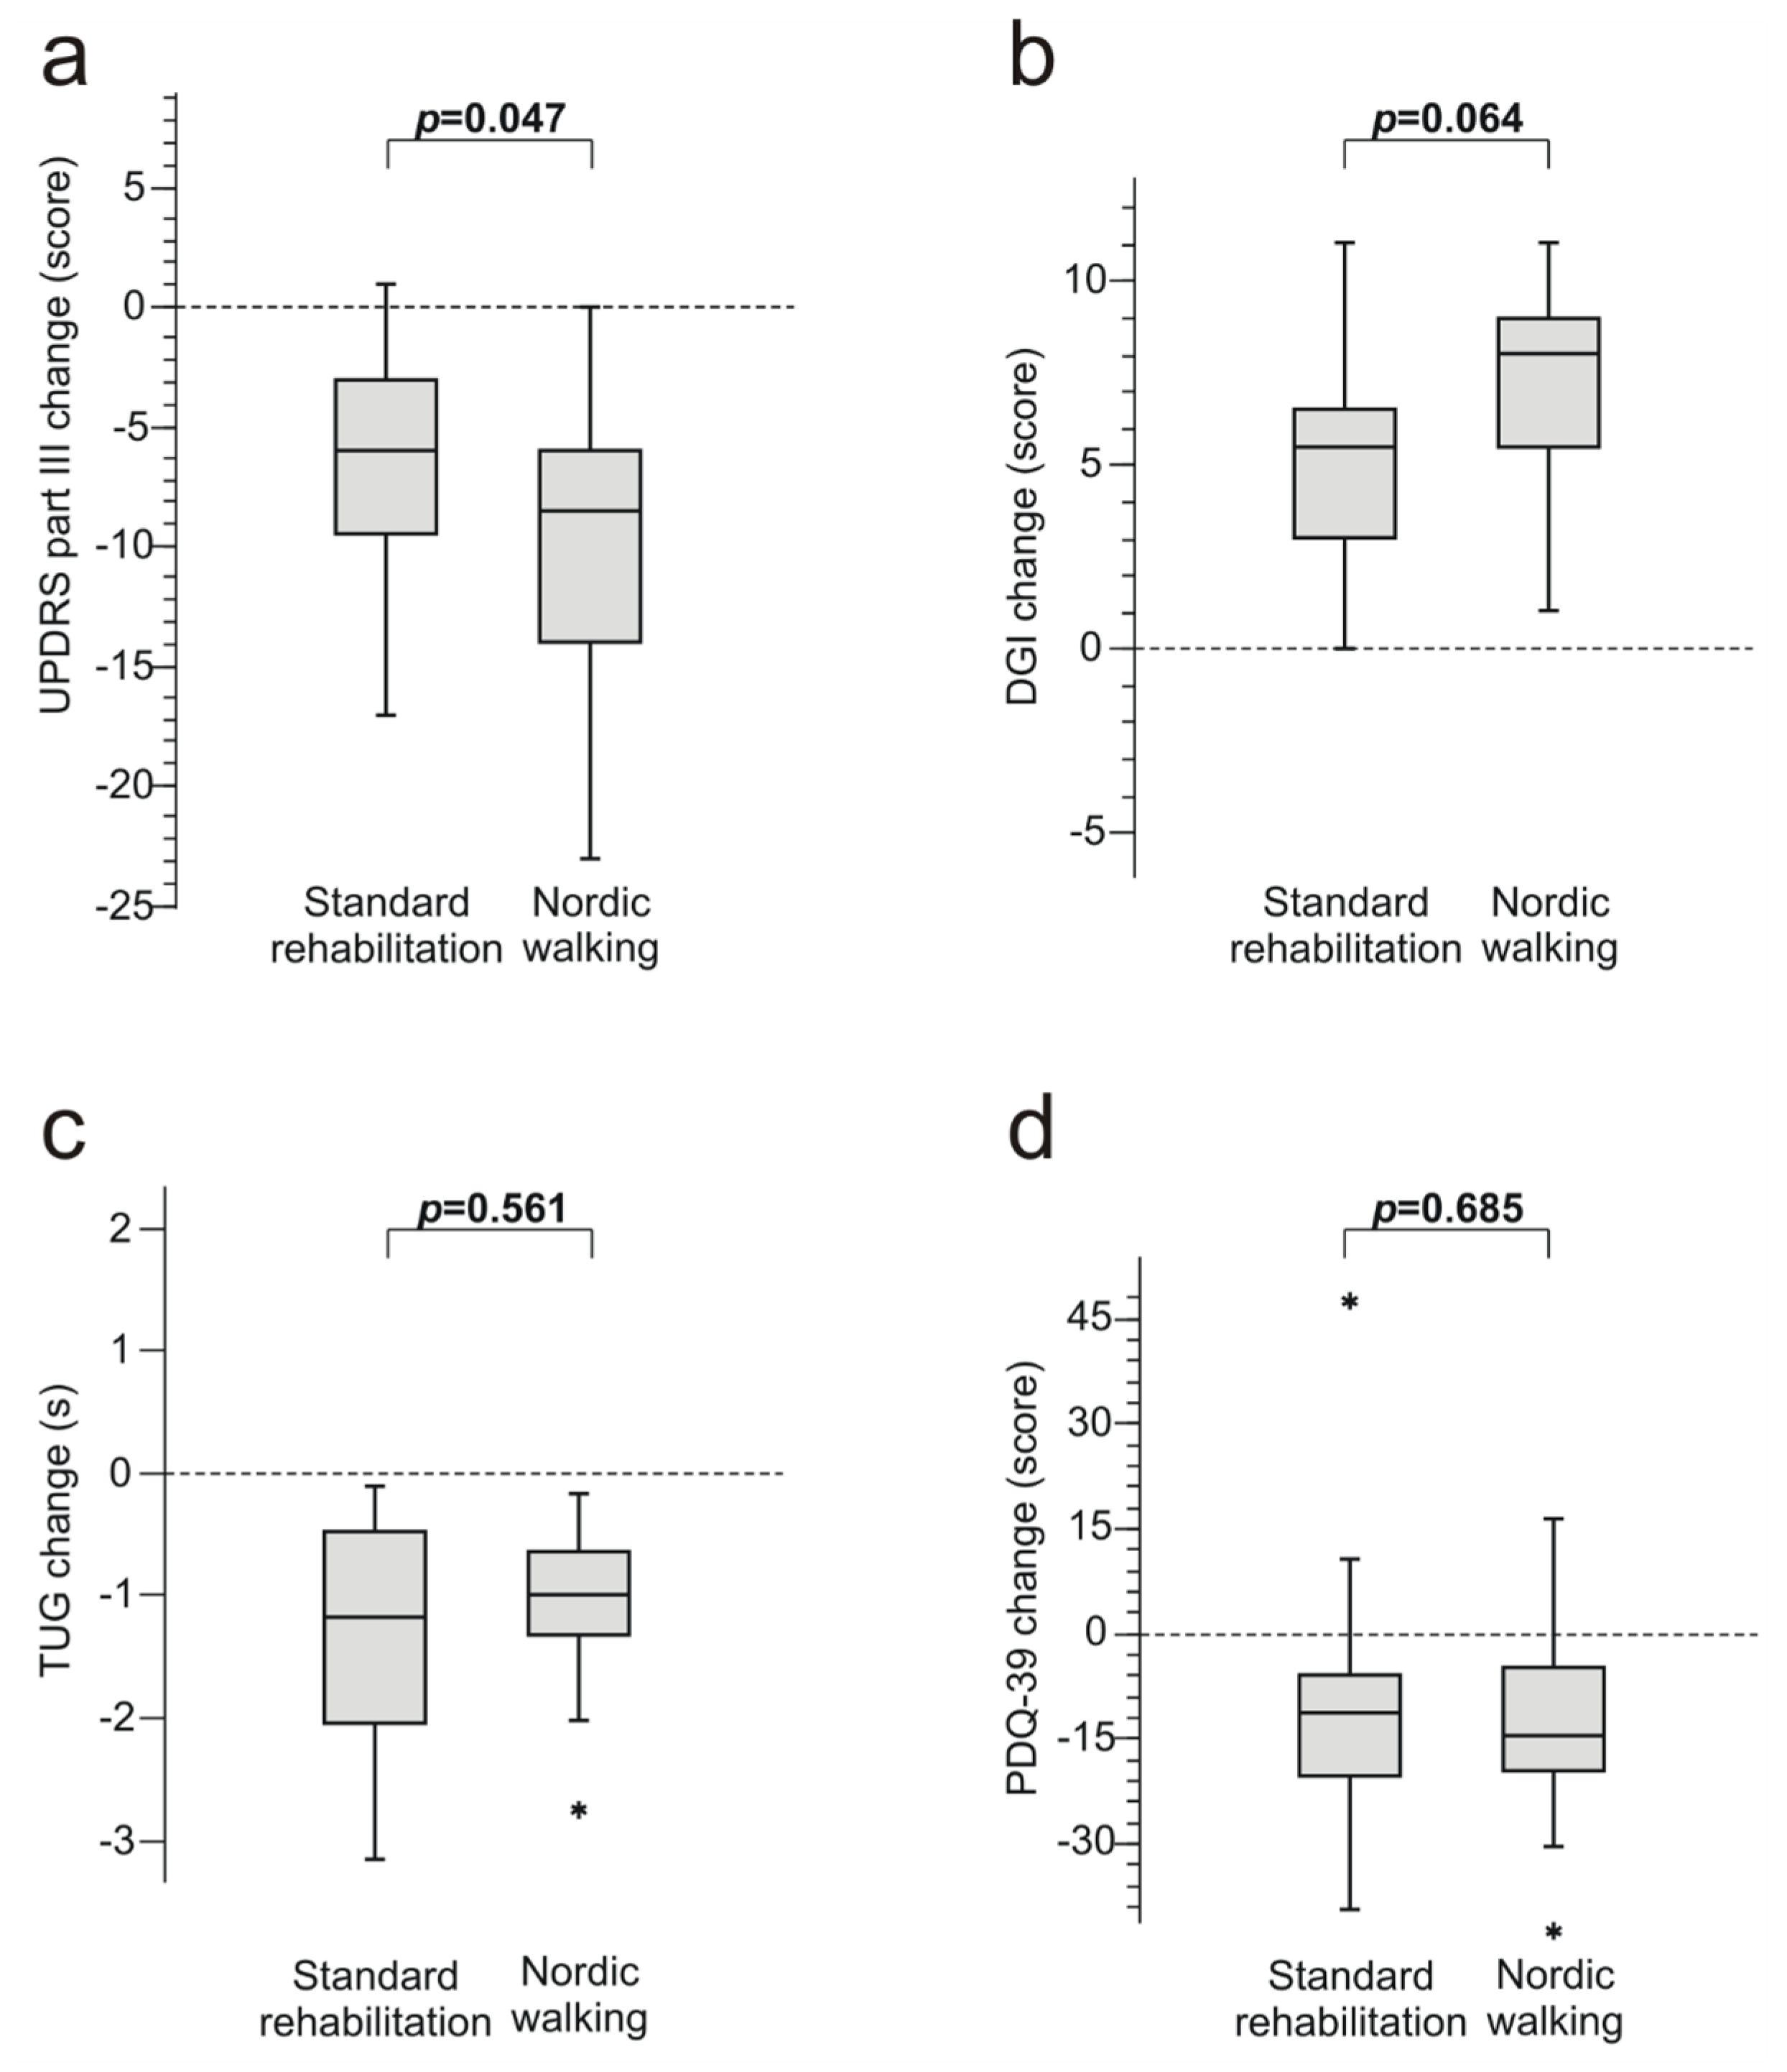 Medicina Free Full Text Effectiveness Of 6 Week Nordic Walking Training On Functional Performance Gait Quality And Quality Of Life In Parkinson S Disease Html